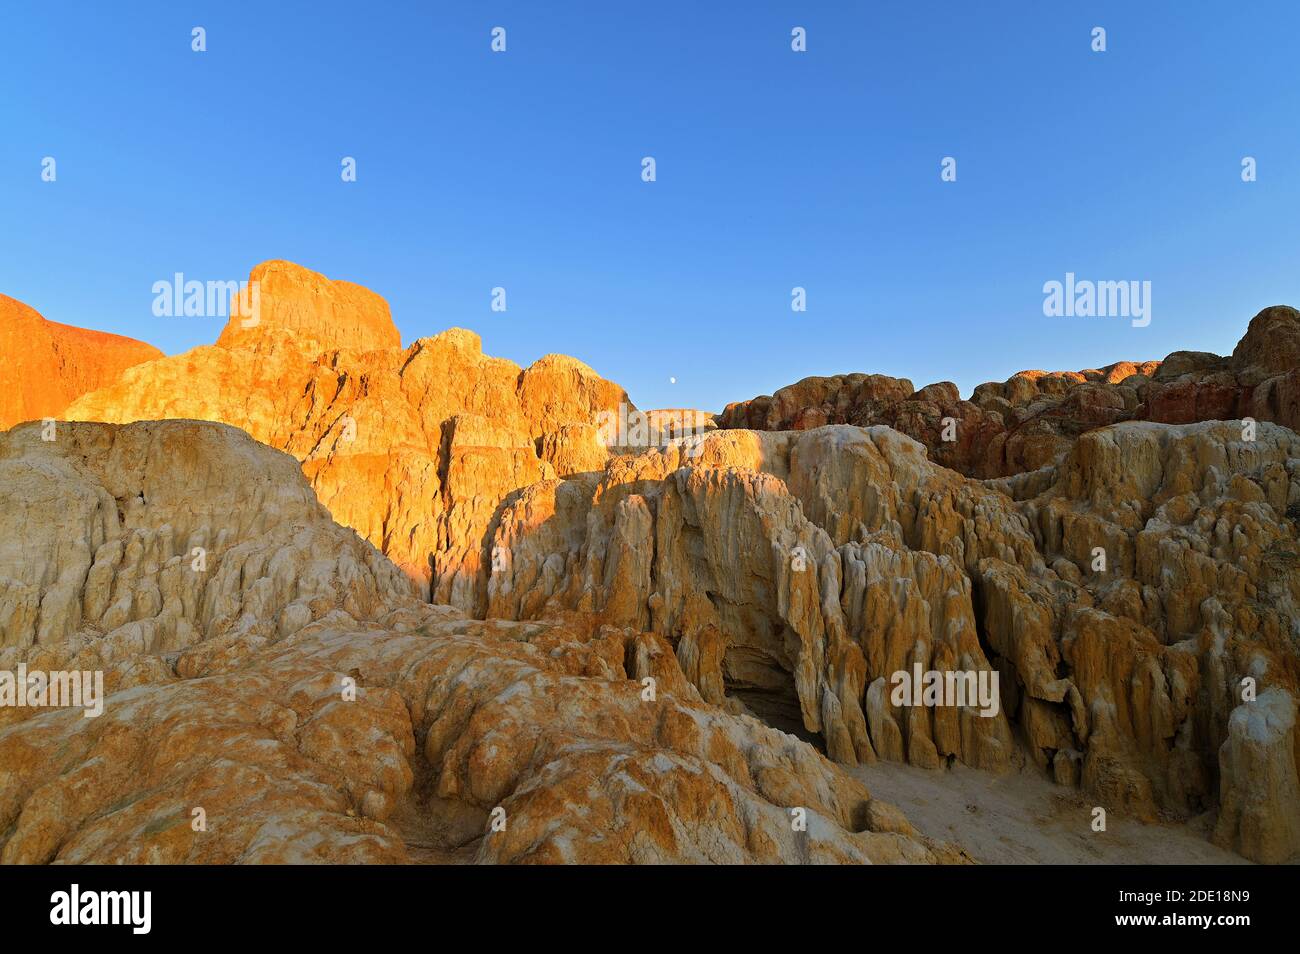 The rising moon at sunset, over the multi-colored eroded rock formations at Wucaitan, Five-Colored Beach, Burqin County, Northern Xinjiang, China Stock Photo